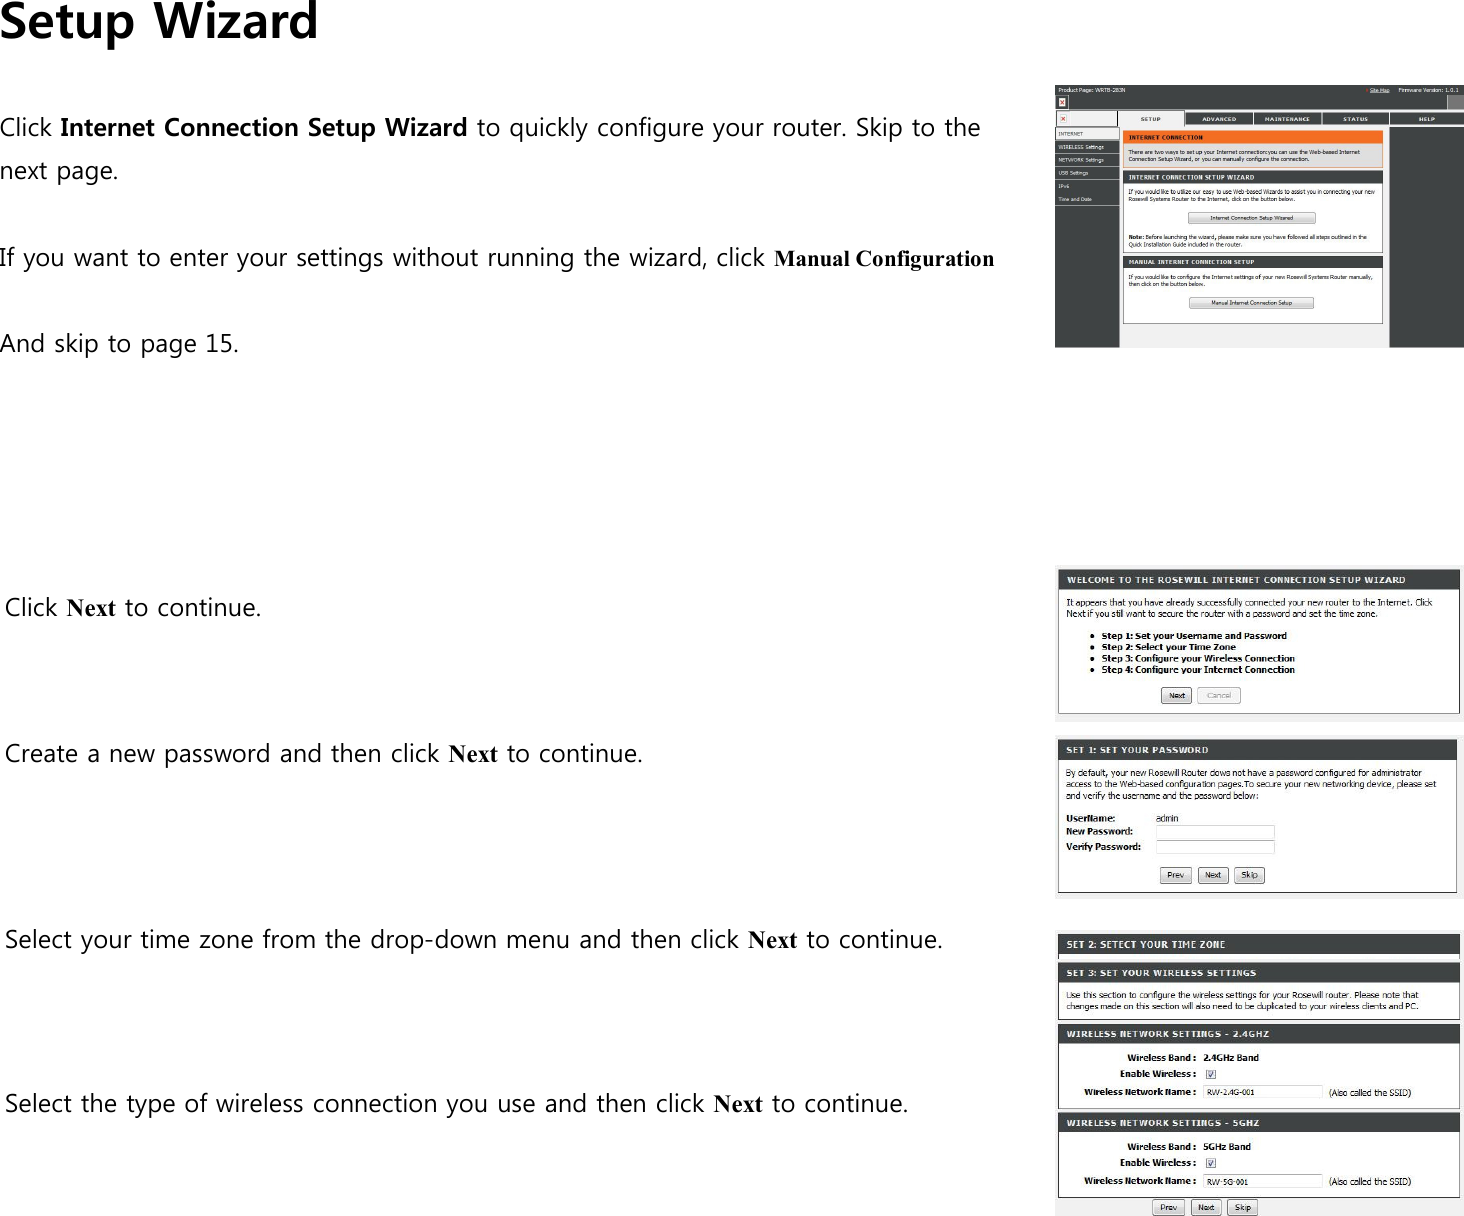 Setup Wizard  Click Internet Connection Setup Wizard to quickly configure your router. Skip to the next page.  If you want to enter your settings without running the wizard, click Manual Configuration  And skip to page 15.       Click Next to continue.      Create a new password and then click Next to continue.        Select your time zone from the drop-down menu and then click Next to continue.       Select the type of wireless connection you use and then click Next to continue.                                                            